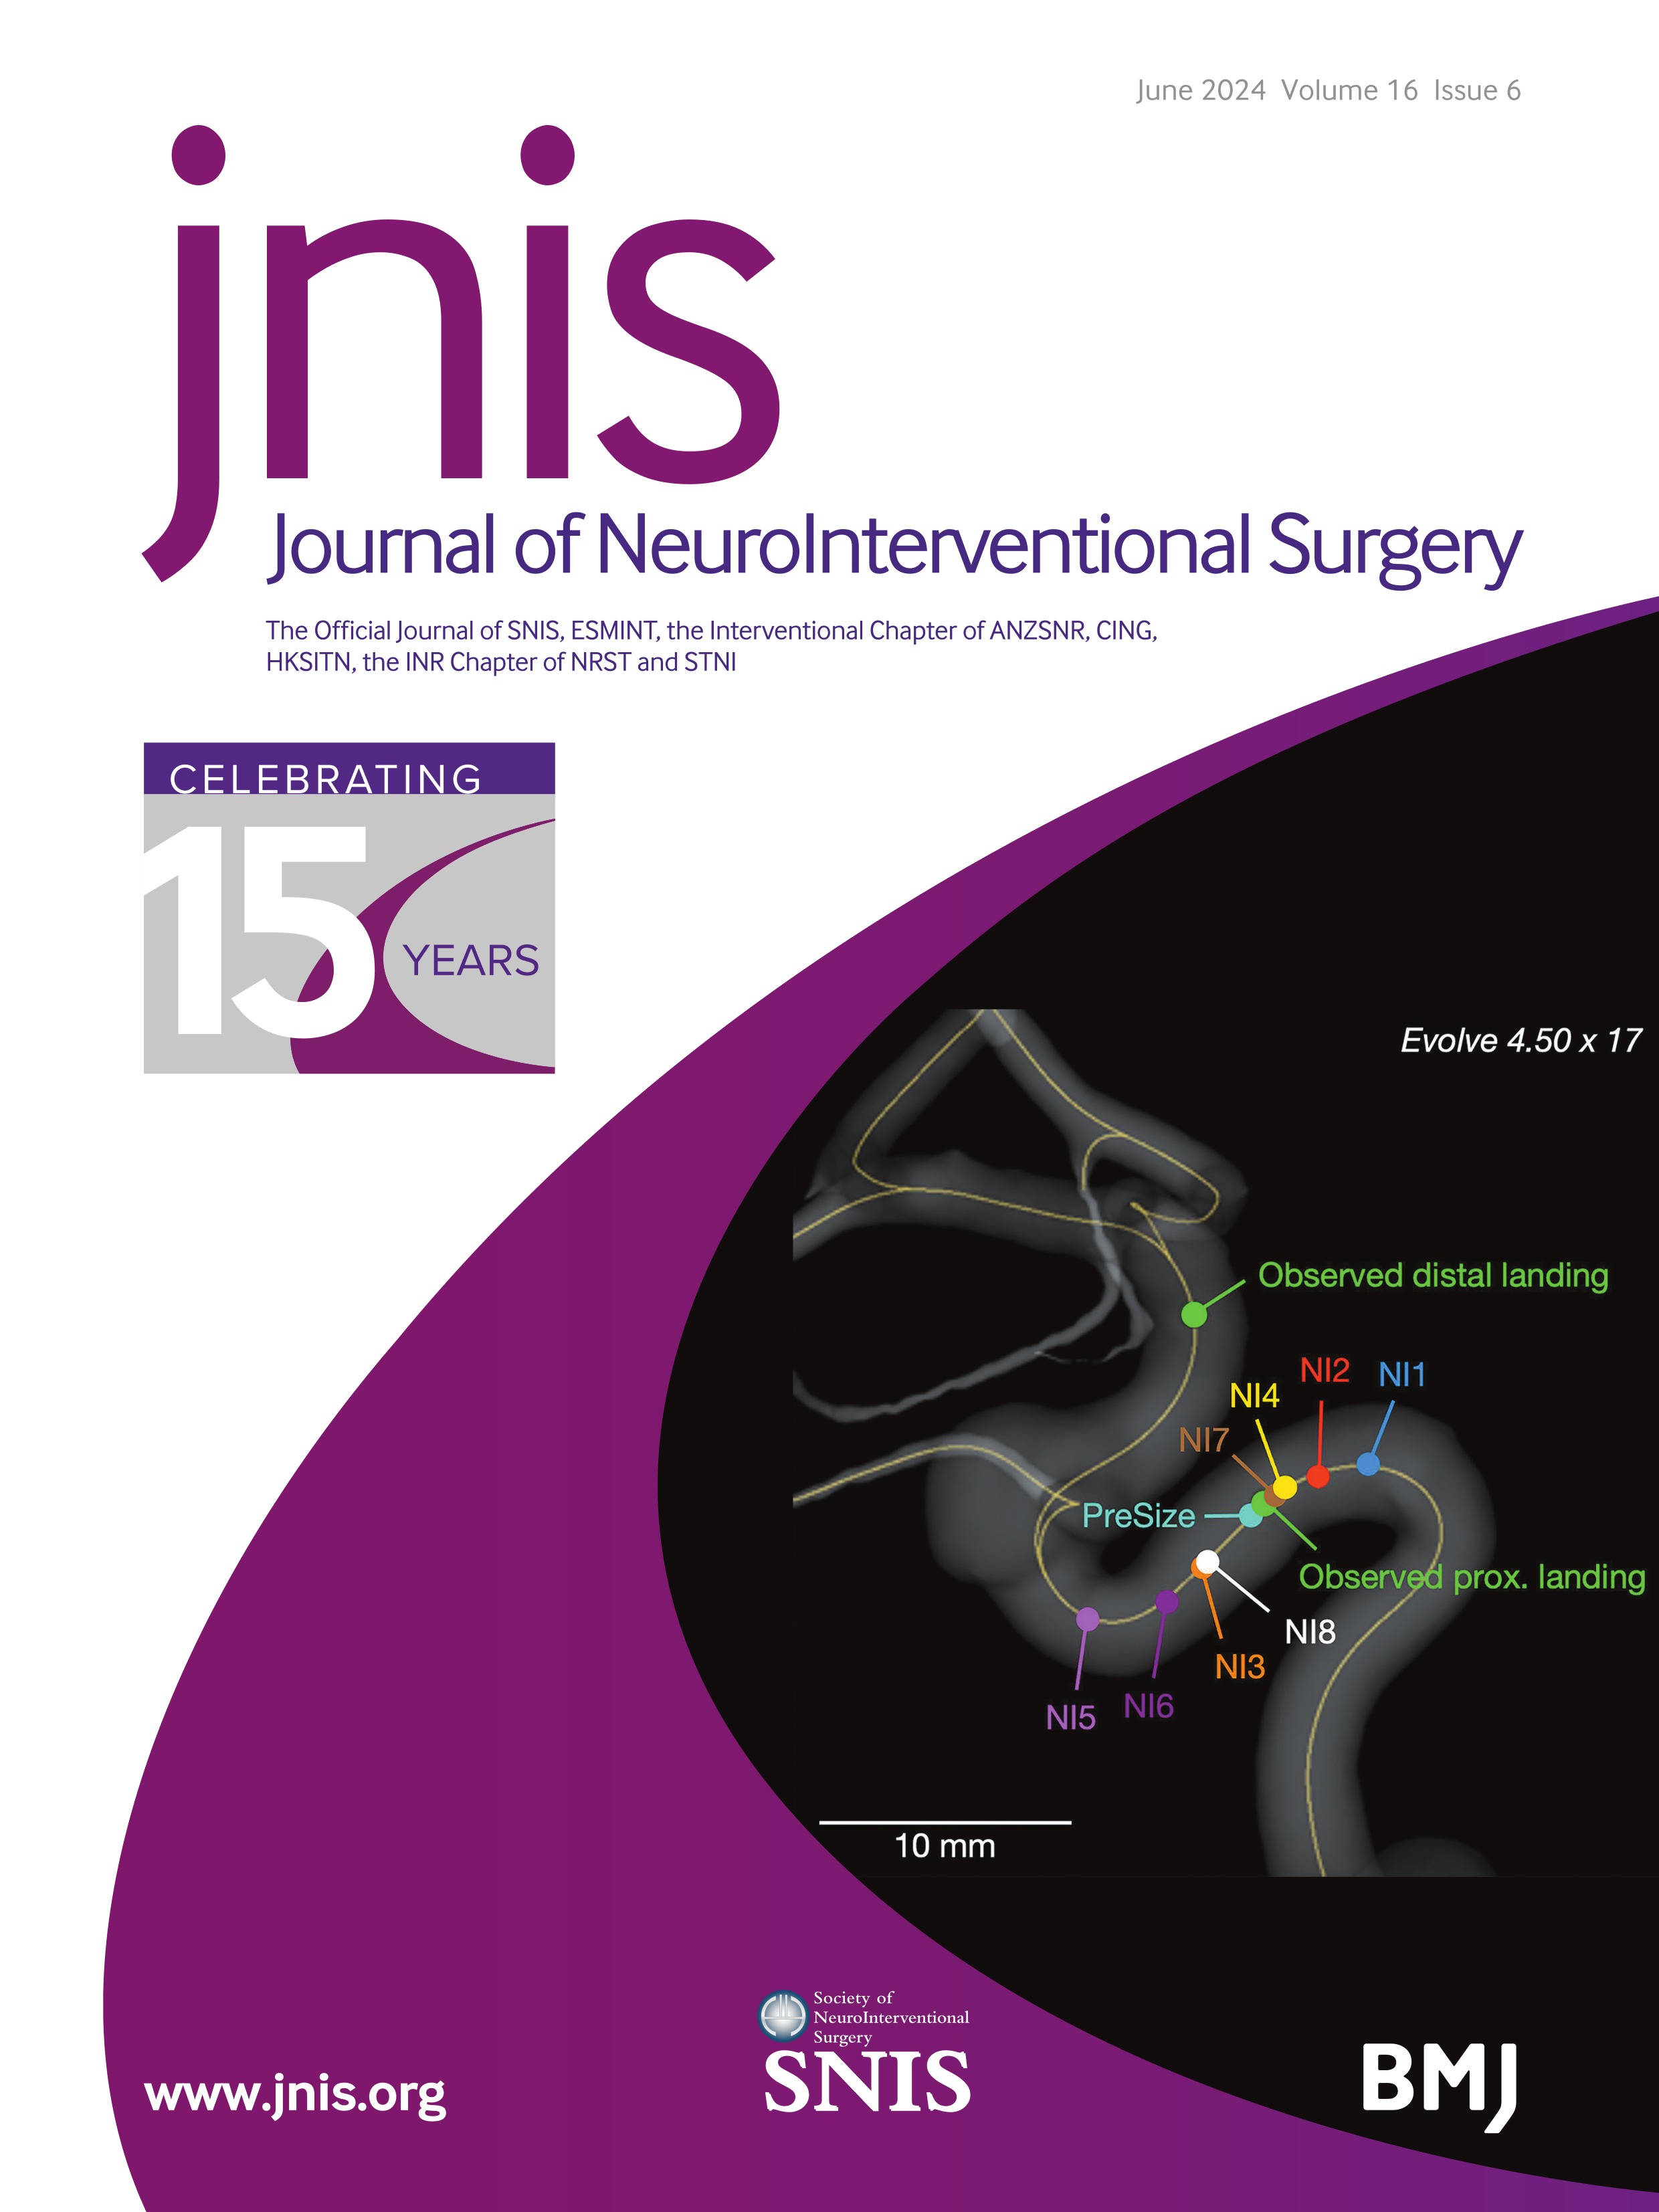 Association of the combined stereotactic radiosurgery and embolization strategy and long-term outcomes in brain arteriovenous malformations with a volume <=10 mL: a nationwide multicenter observational prospective cohort study